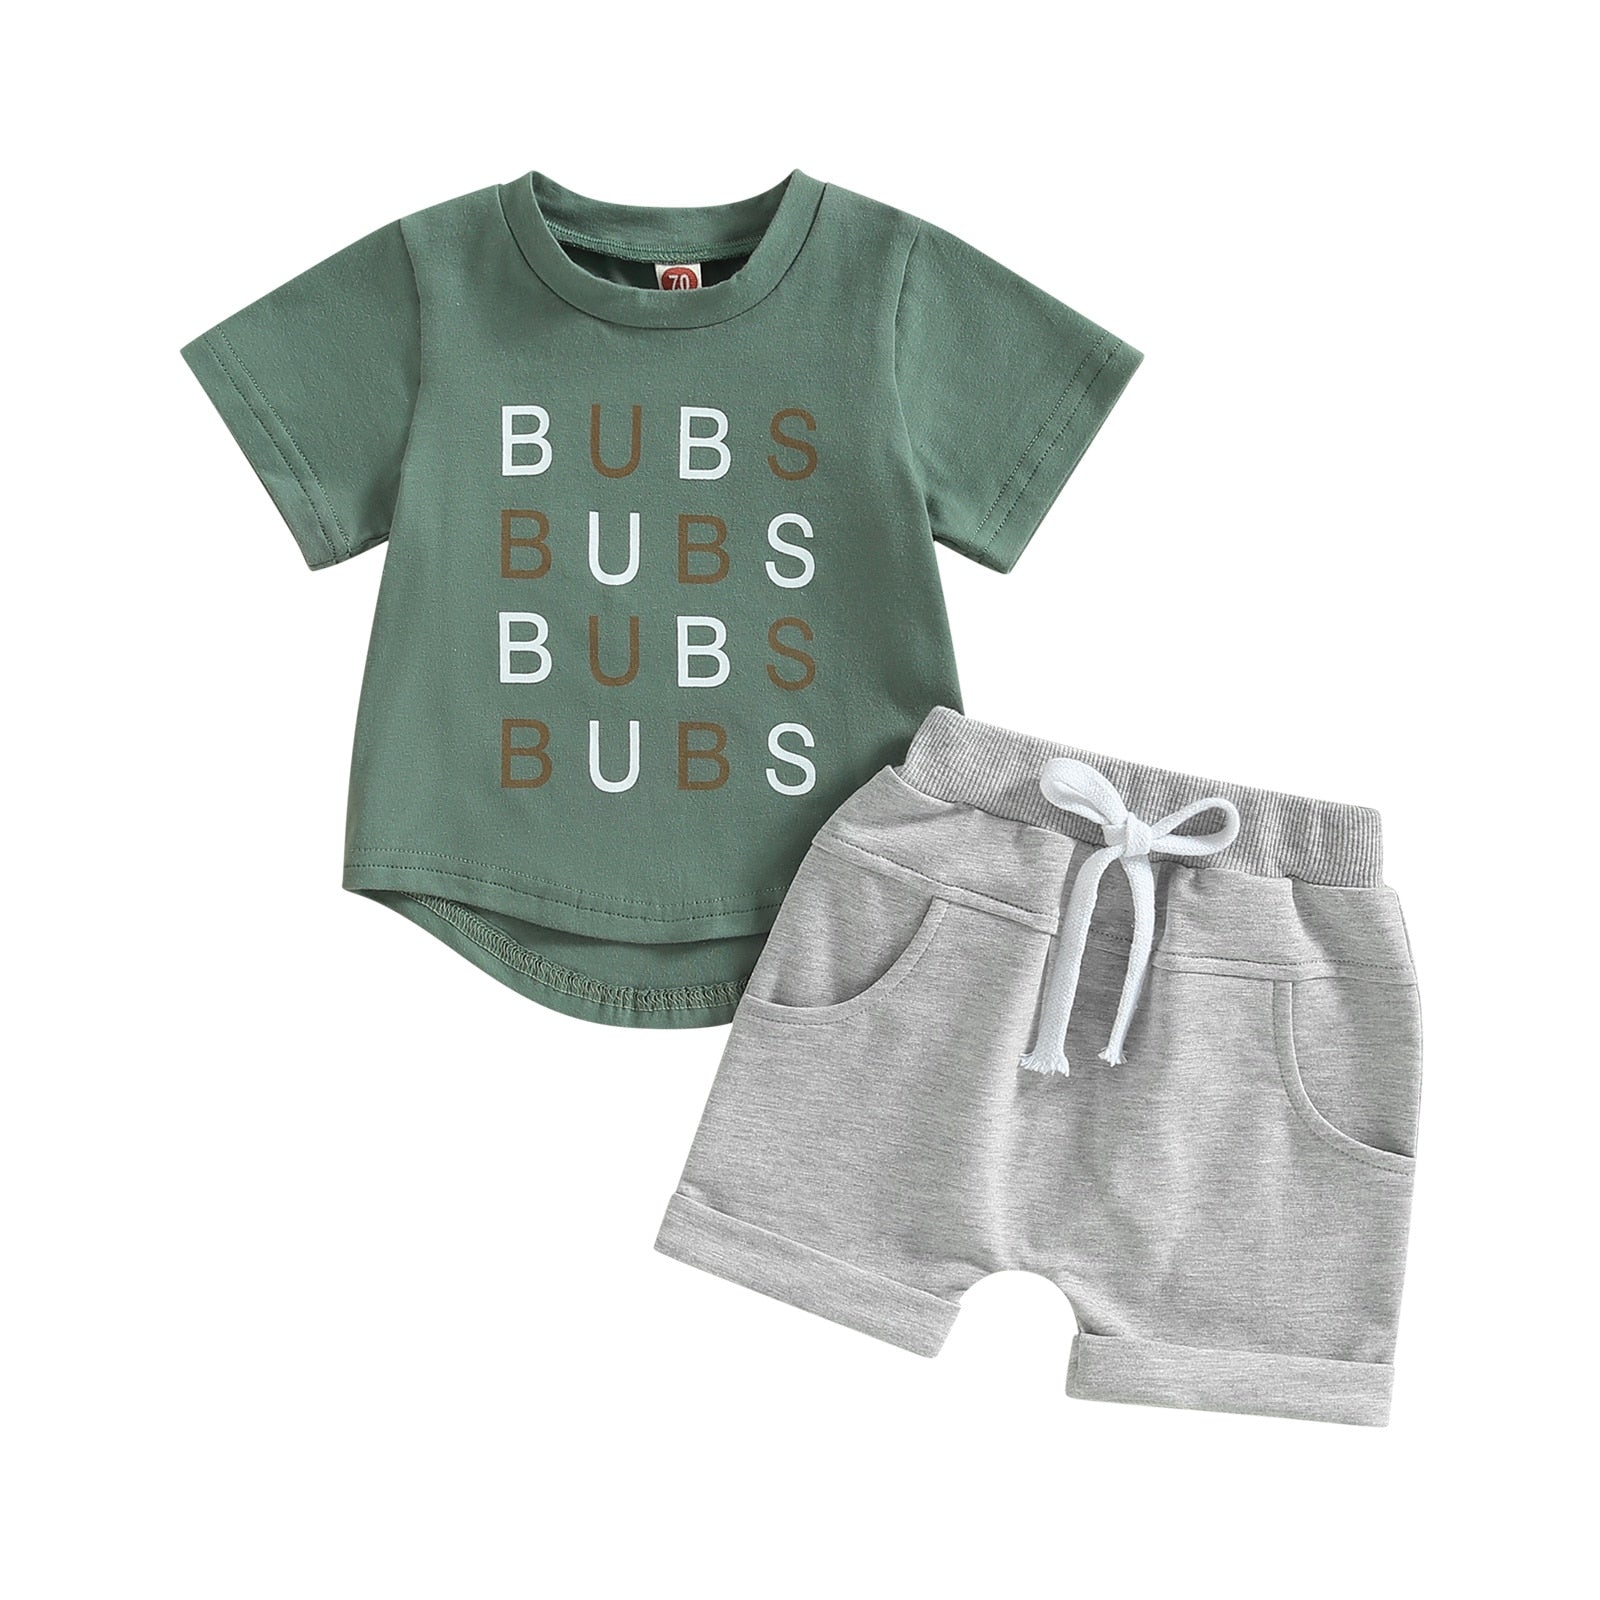 B for Bubs Baby Clothing Set